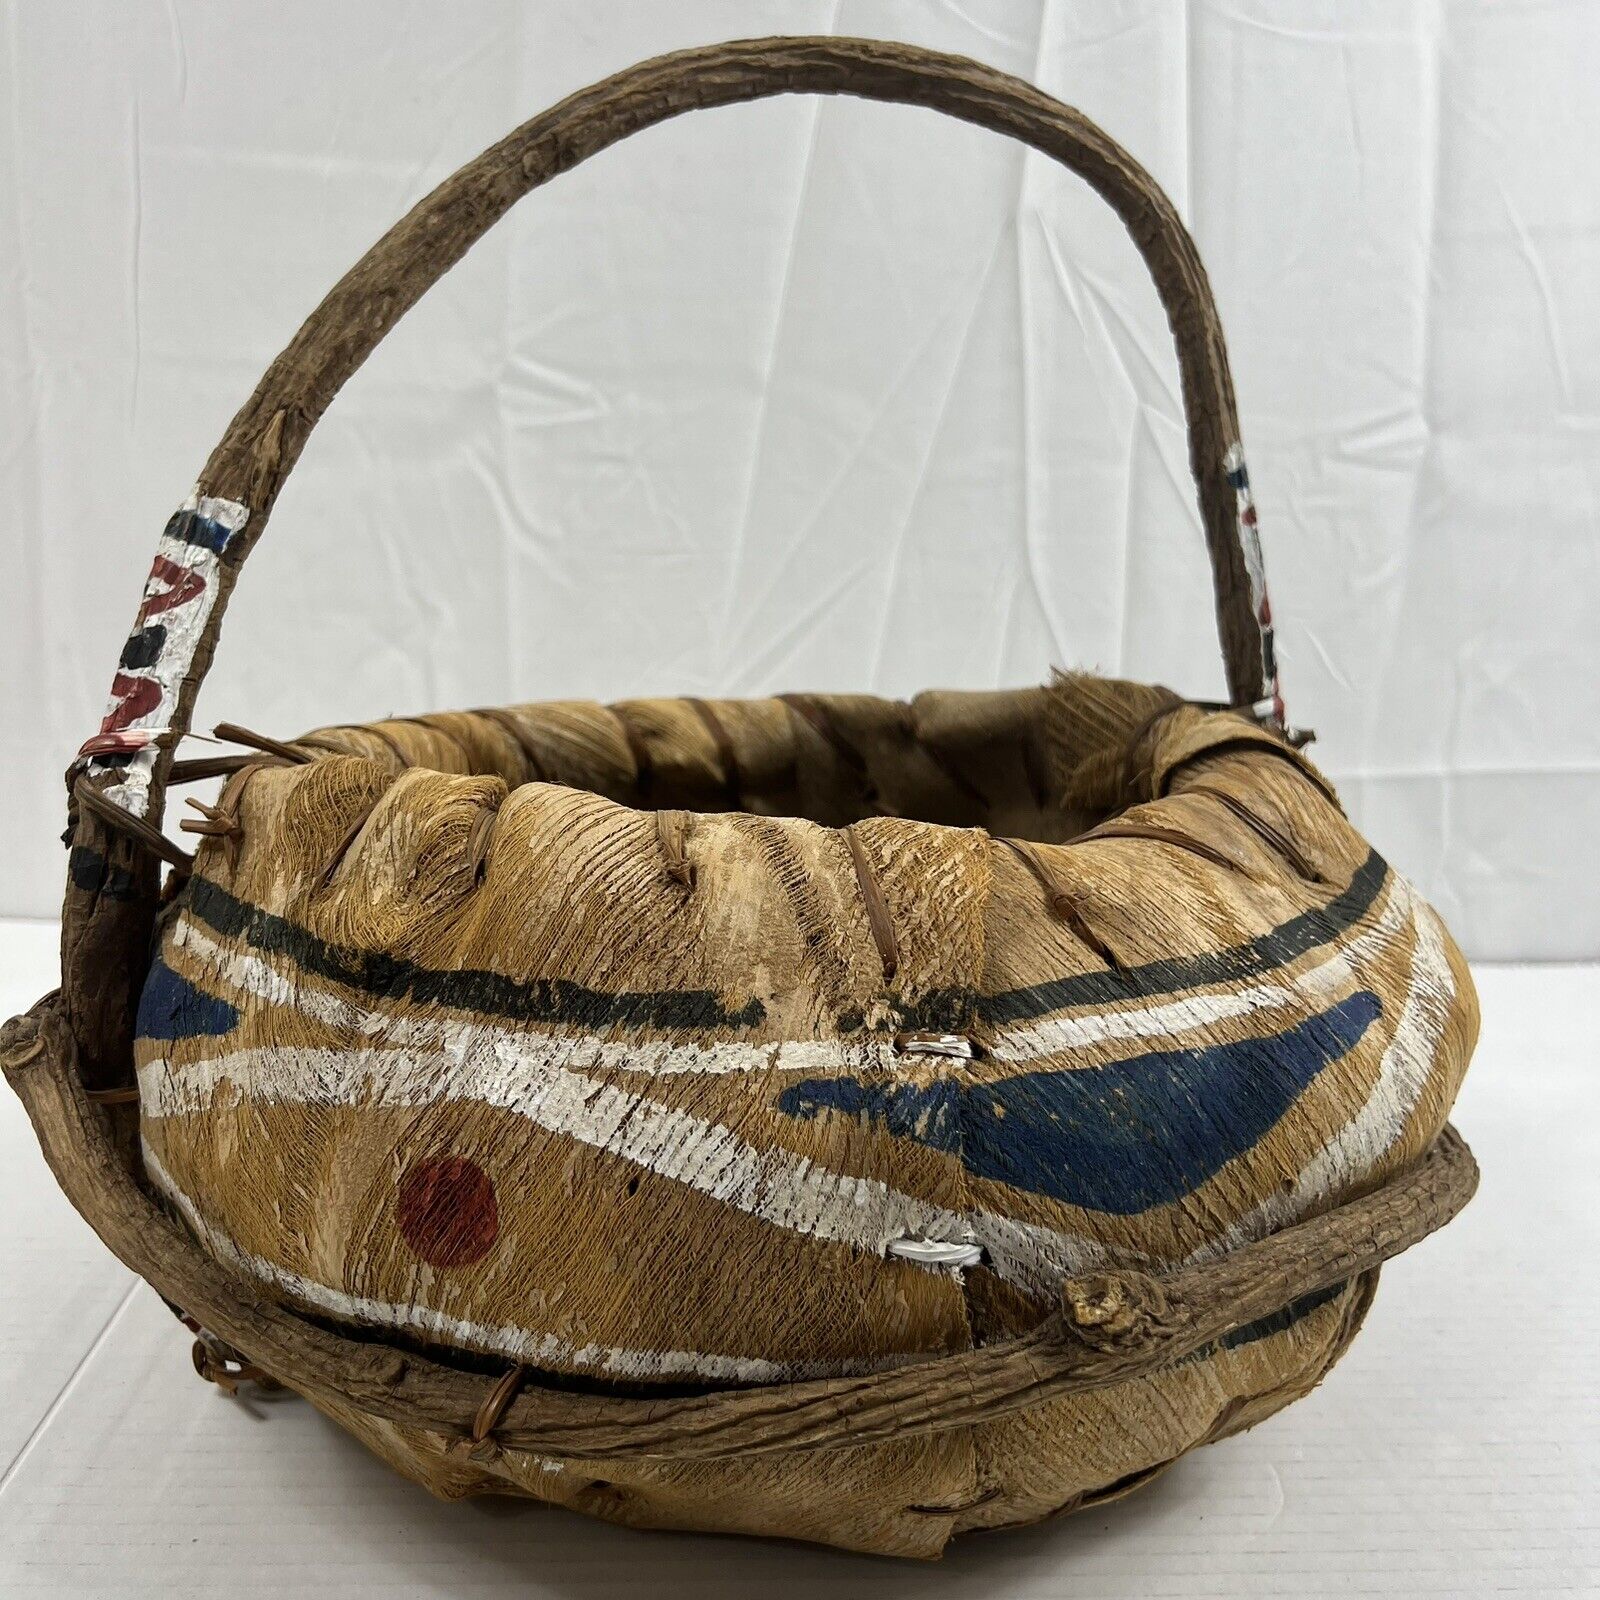 Primitive Antique Native American Handmade Decorative Egg Basket From New Mexico